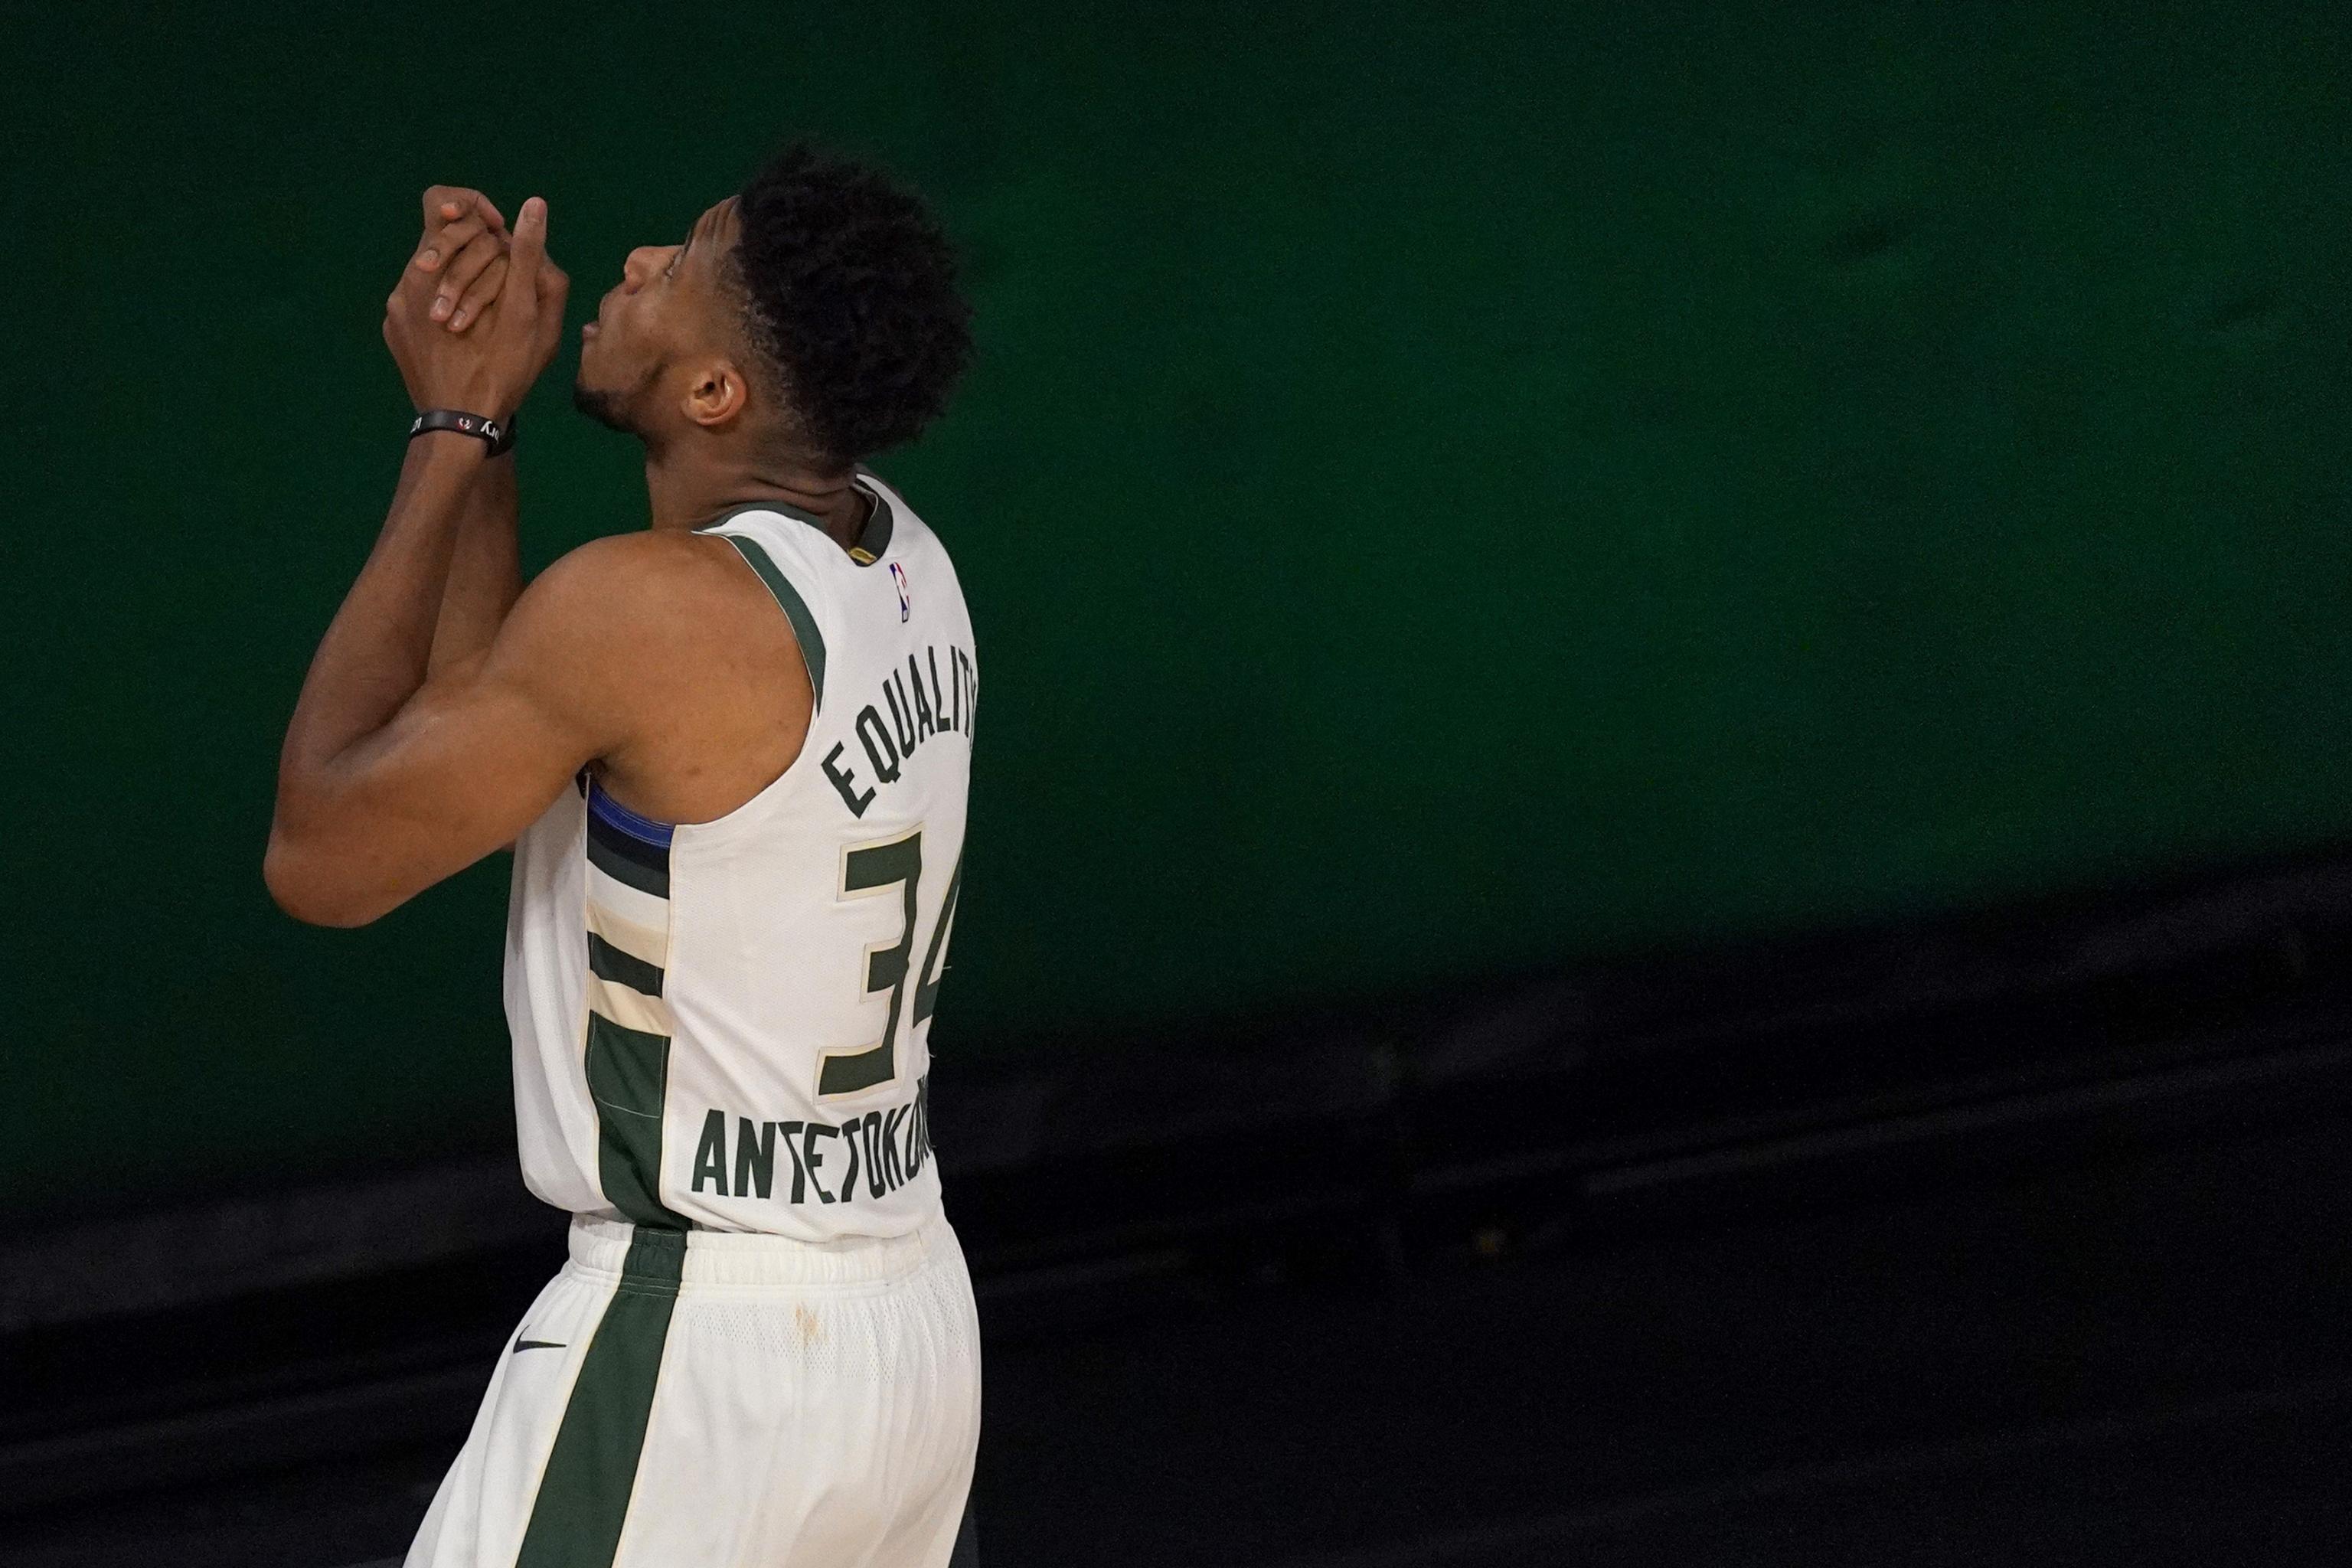 ESPN expert says Giannis Antetokounmpo's free agency situation may